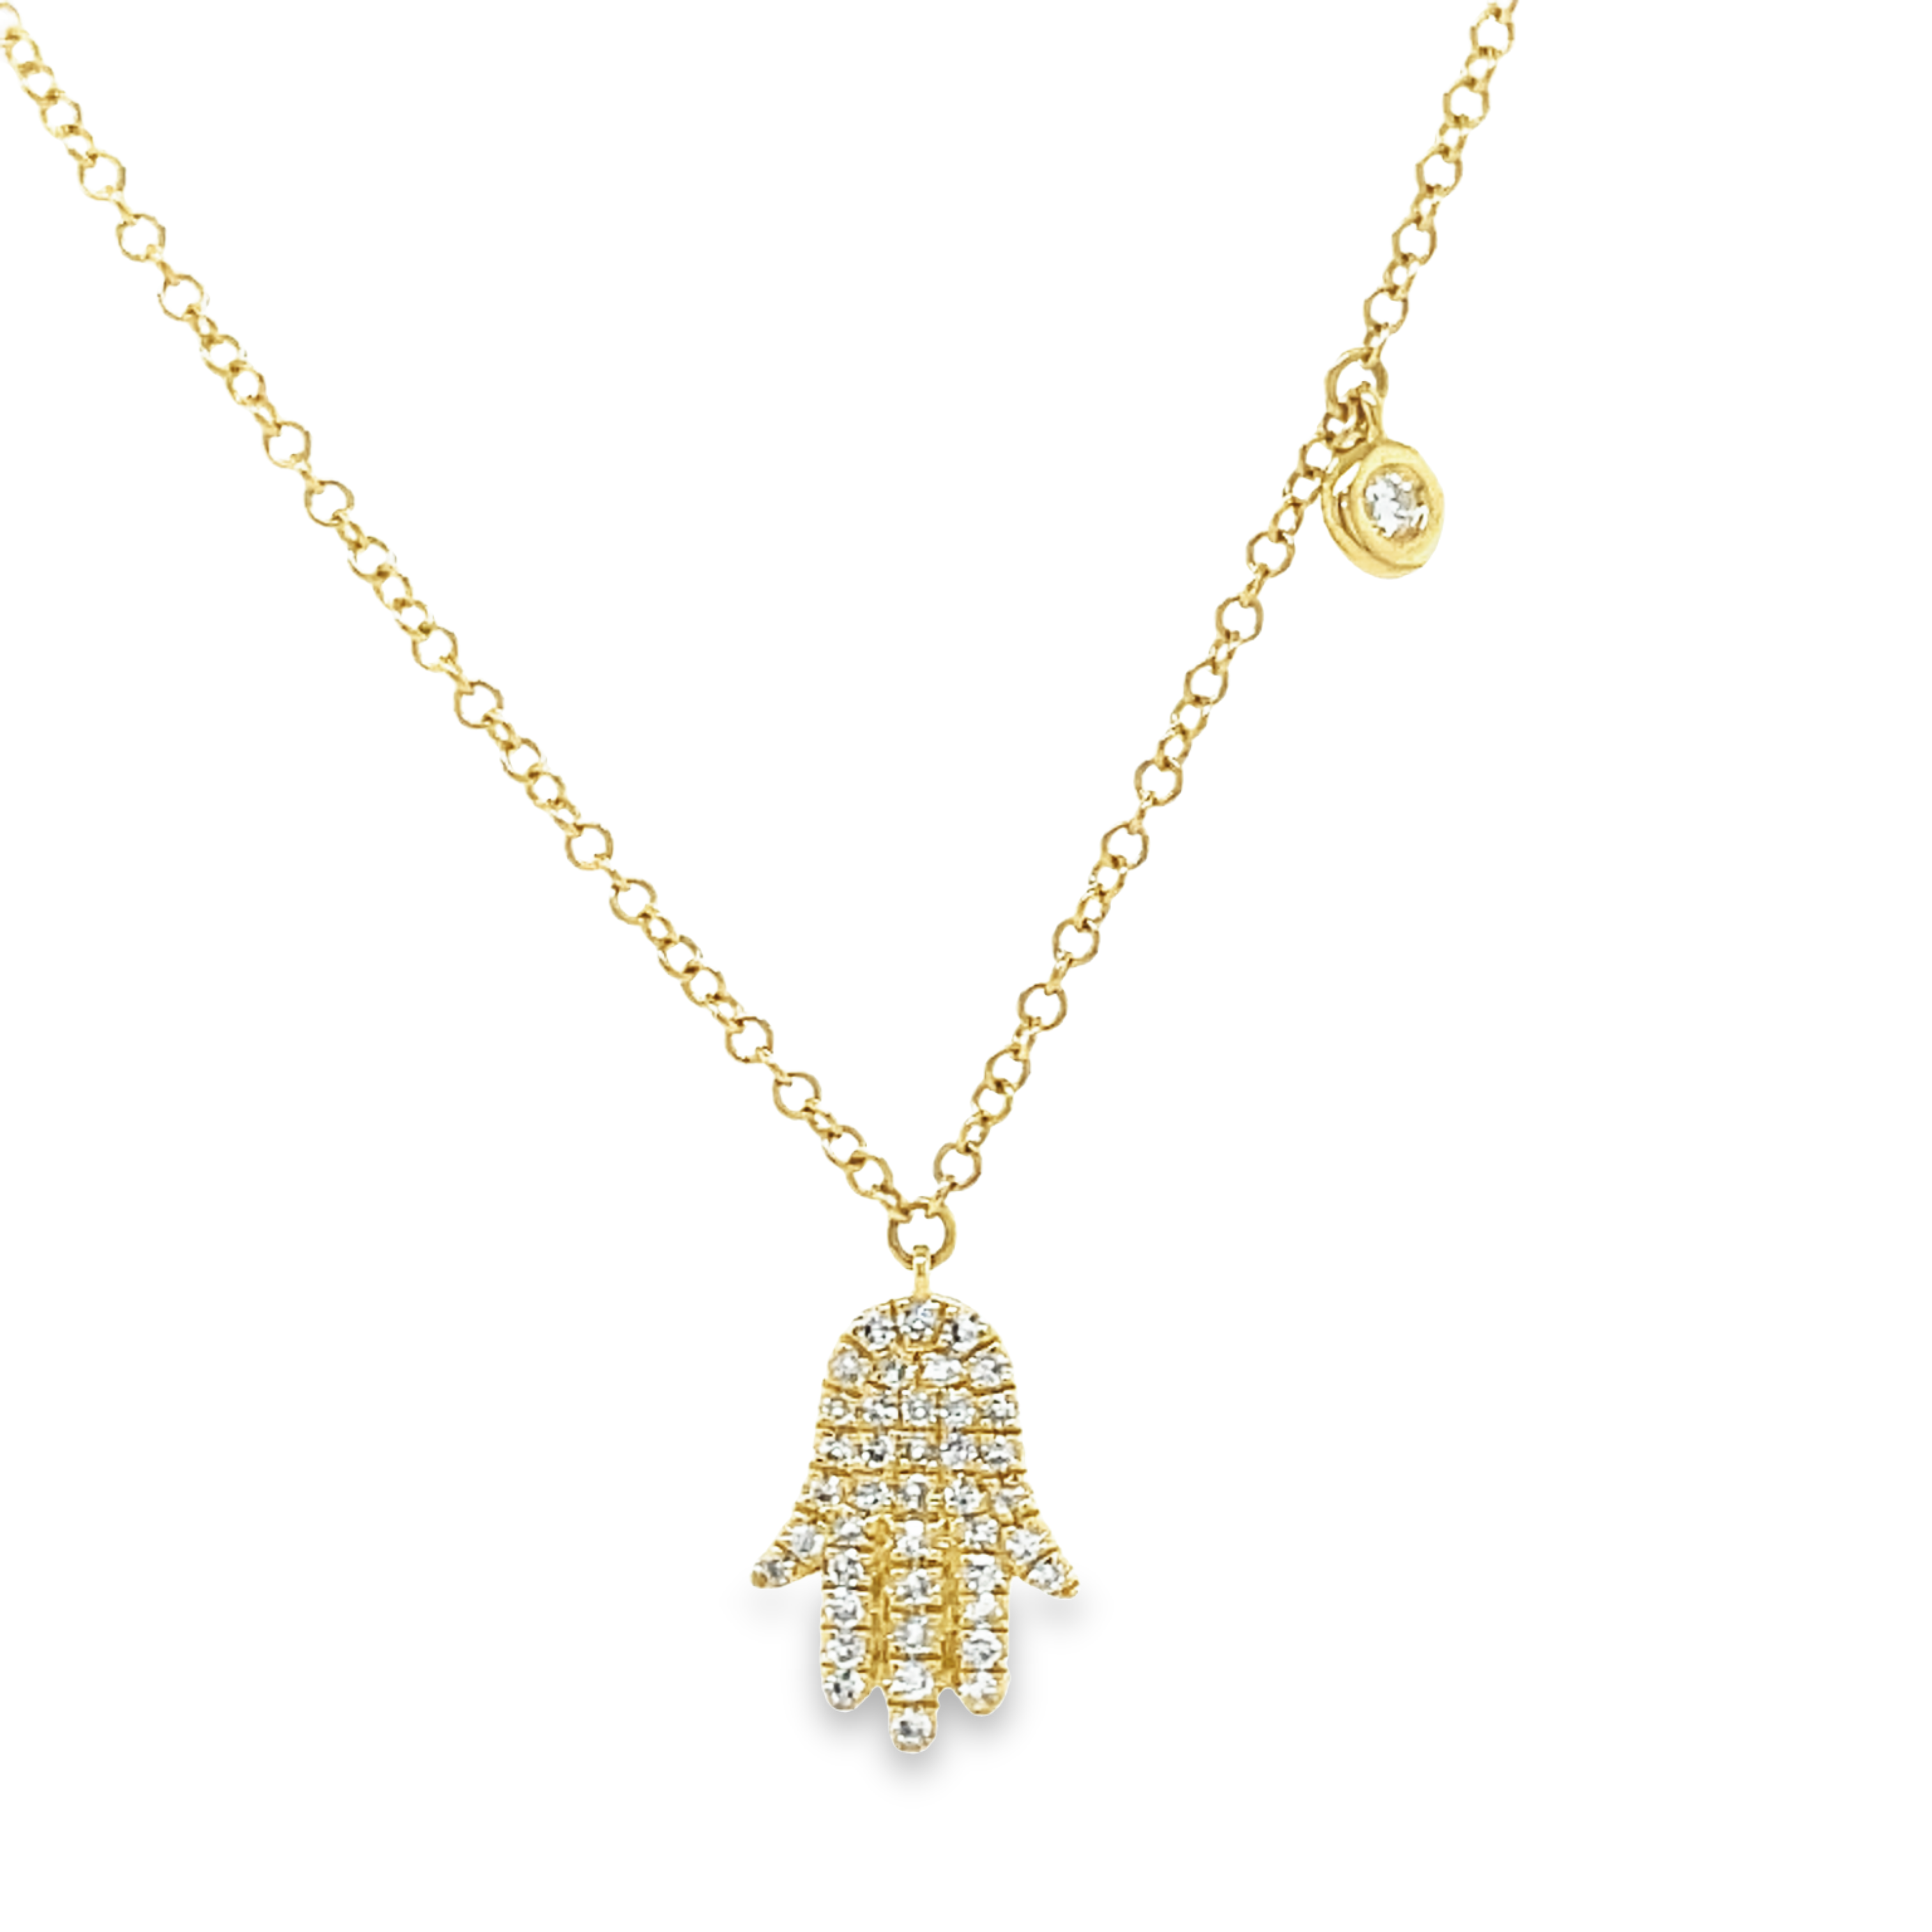 Adorn your neck with this dainty, yet classy diamond pendant necklace! Emblazoned with 0.13 carats of shimmering round diamonds set in 14k yellow gold, this piece features an expertly crafted hamsa with two sizeable loops and a small round diamond on the side. The lobster clasp ensures it stays securely in place on your neck at 18" long. Stylish and secure!